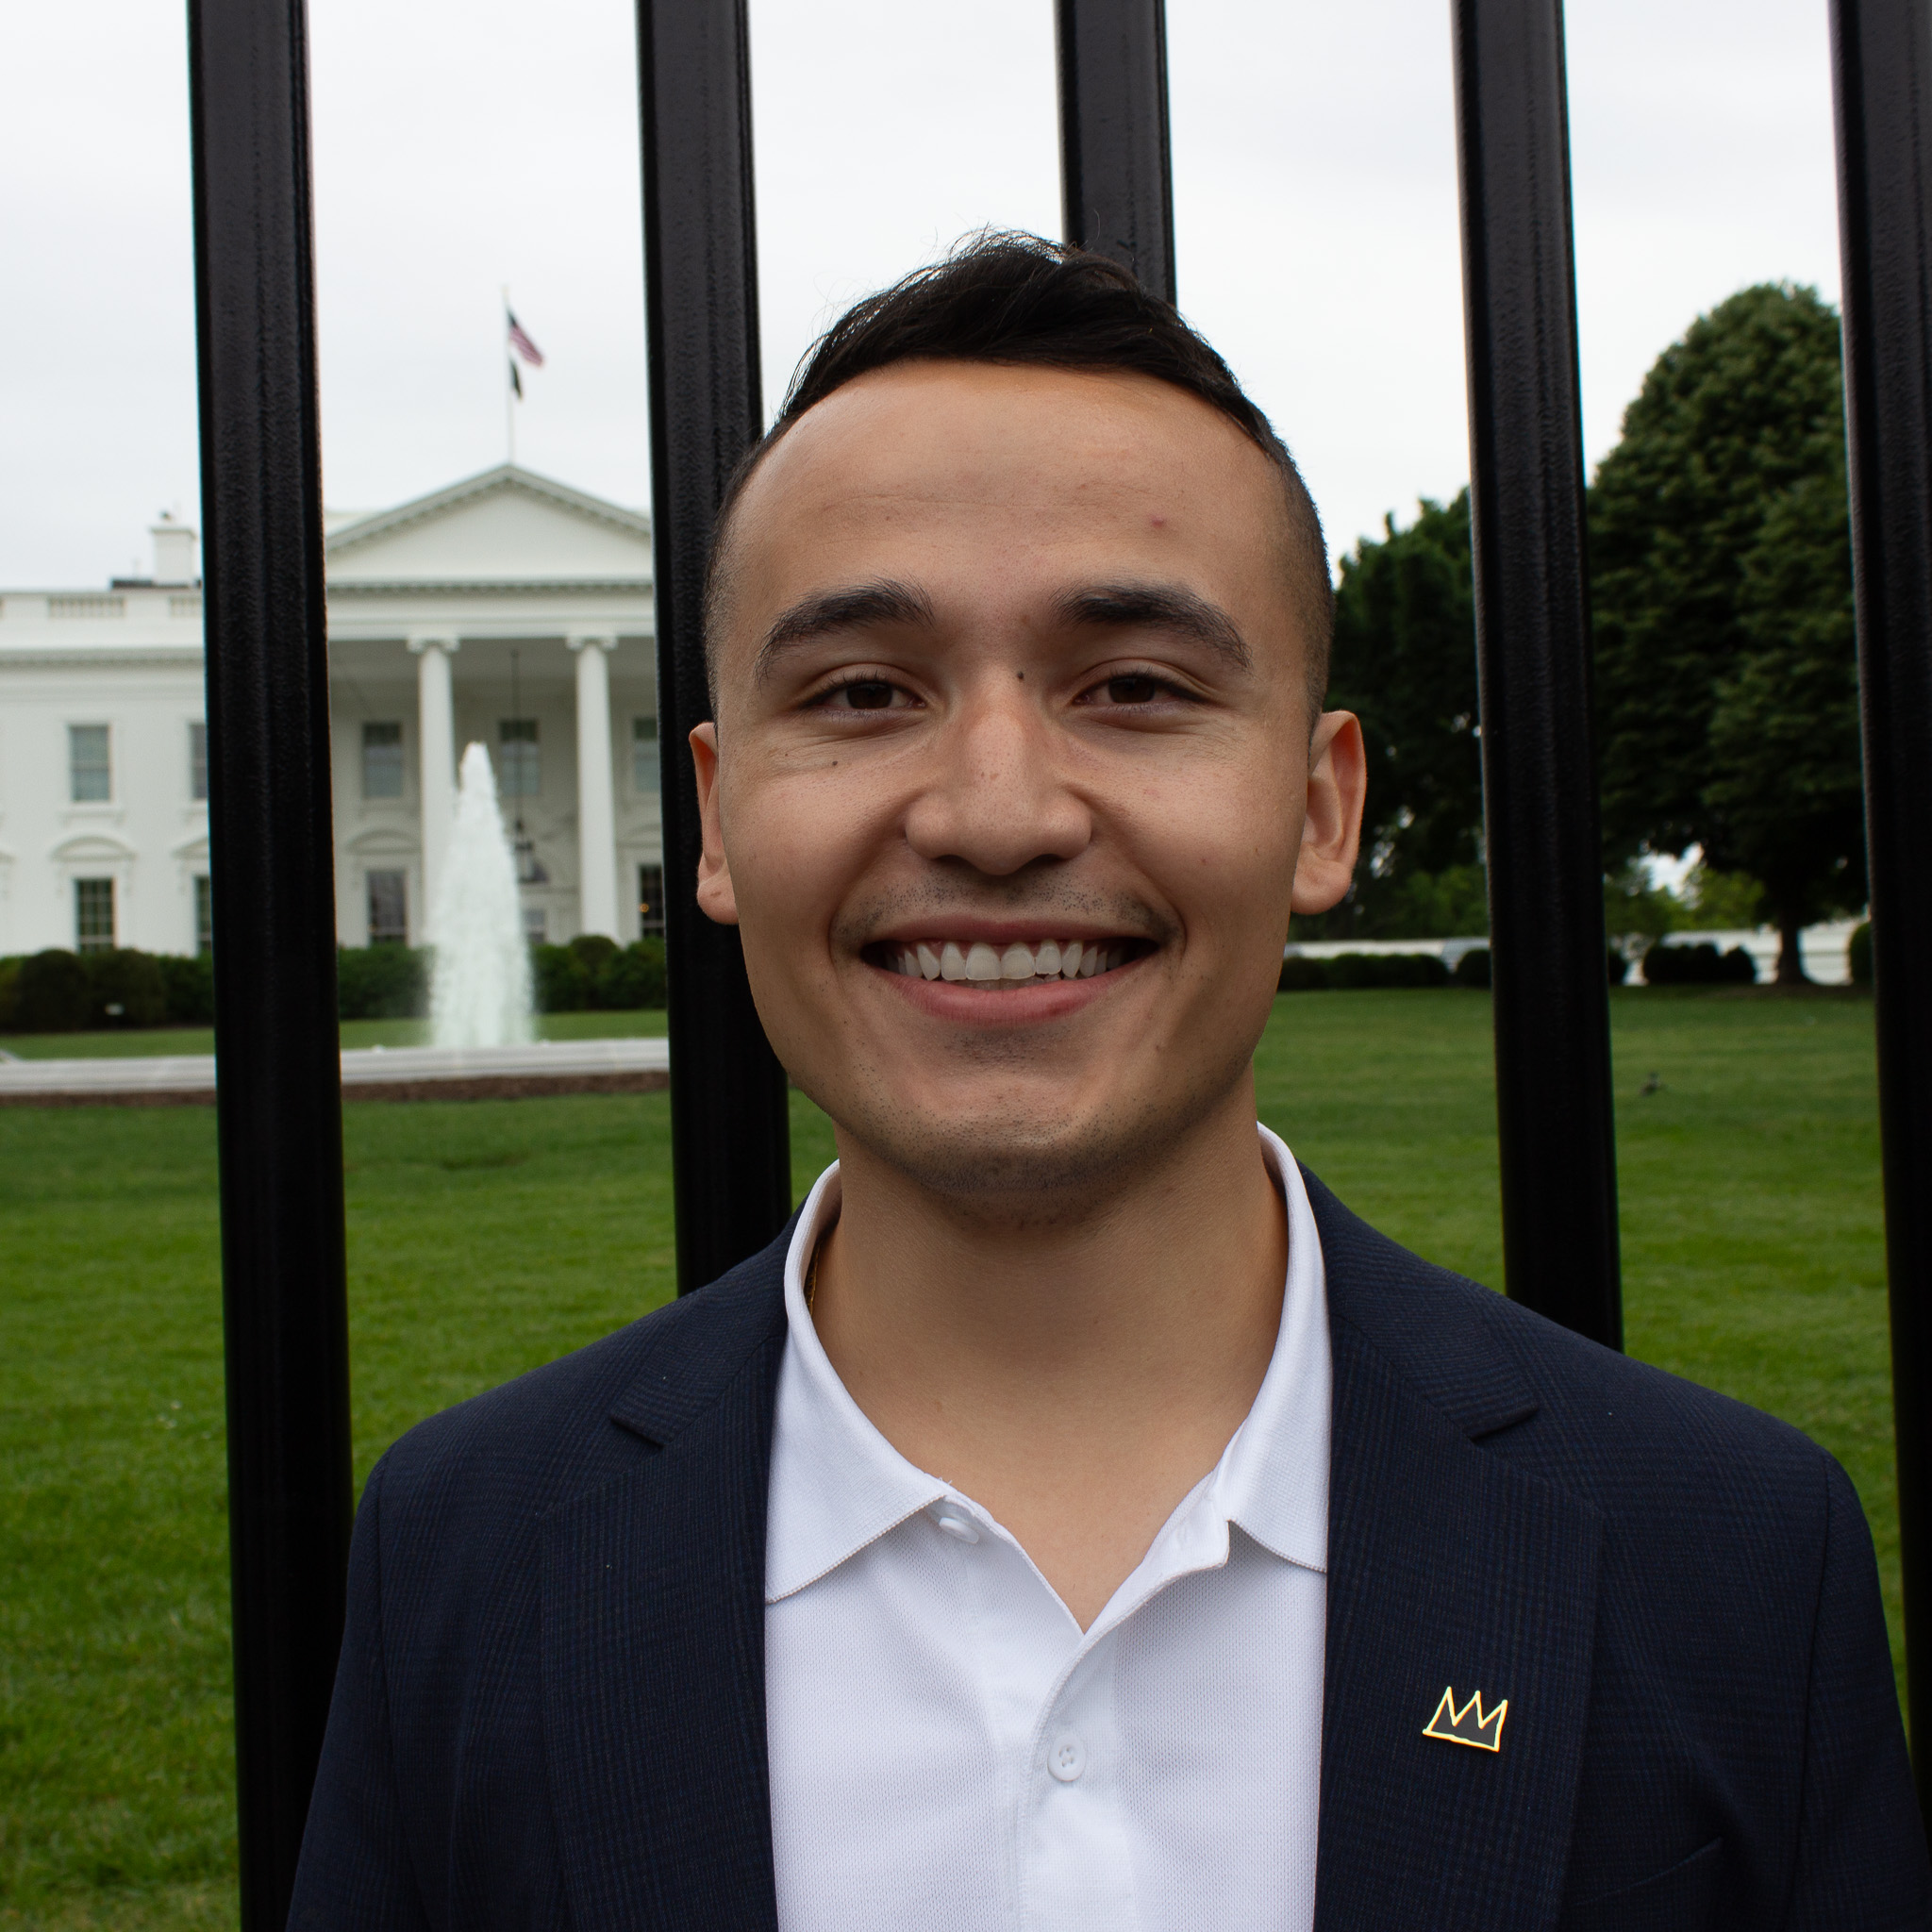 2022 Democracy Camp in DC Fellow Gelser Zavala Garcia stands smiling outside the White House